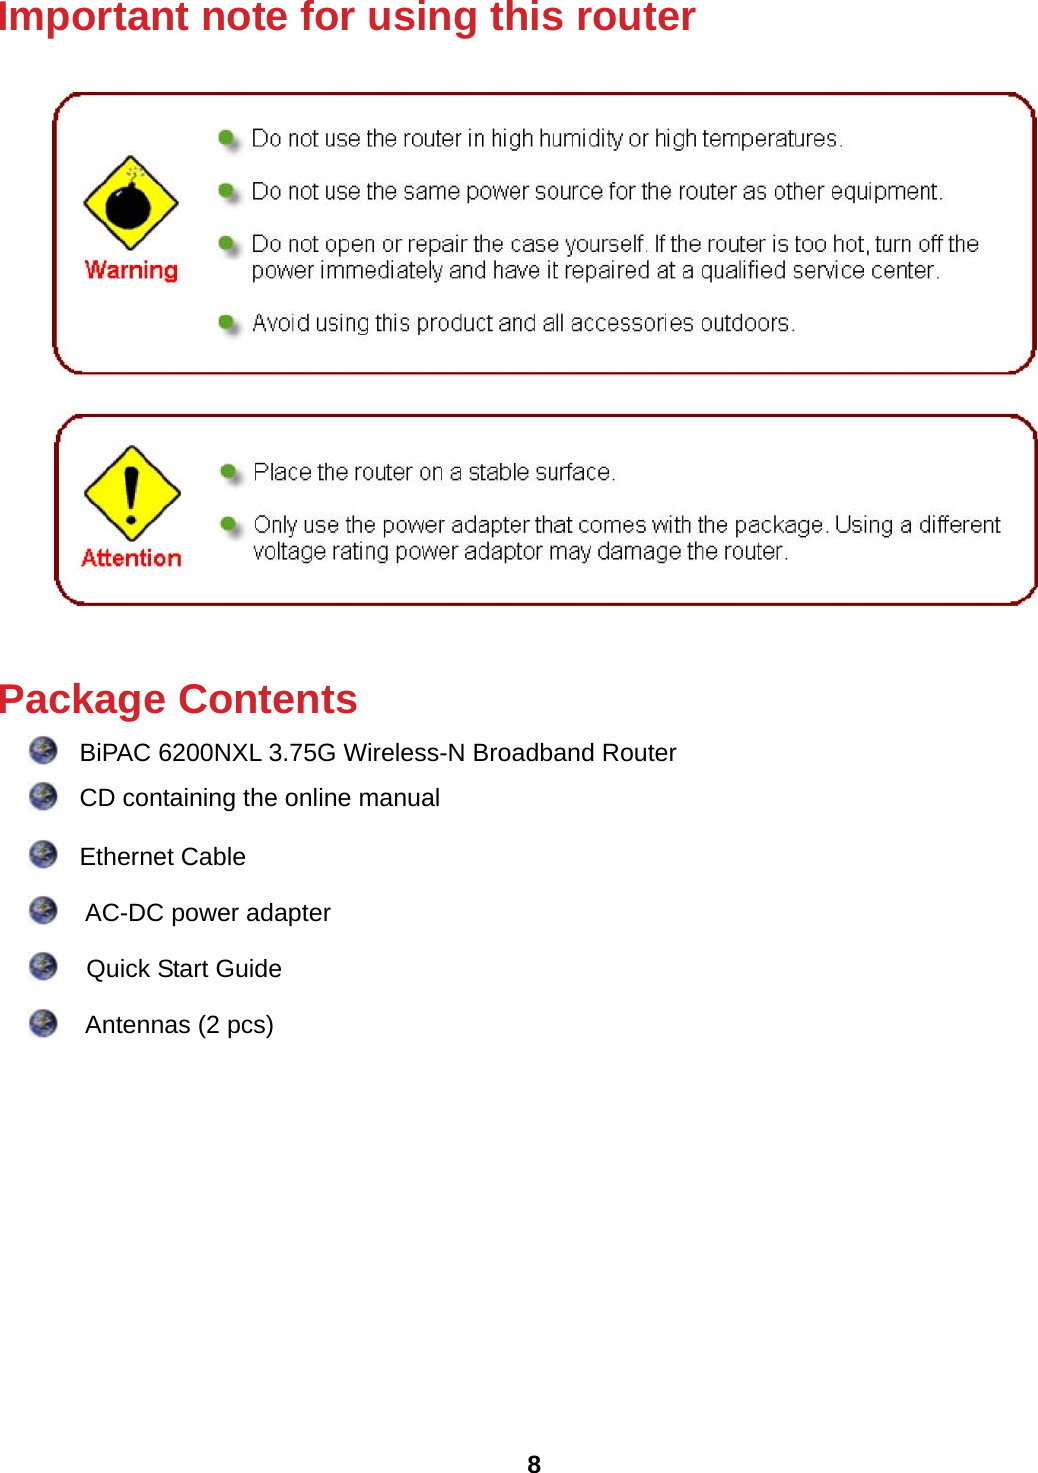  8 Important note for using this router    Package Contents    BiPAC 6200NXL 3.75G Wireless-N Broadband Router     CD containing the online manual    Ethernet Cable      AC-DC power adapter     Quick Start Guide      Antennas (2 pcs)         